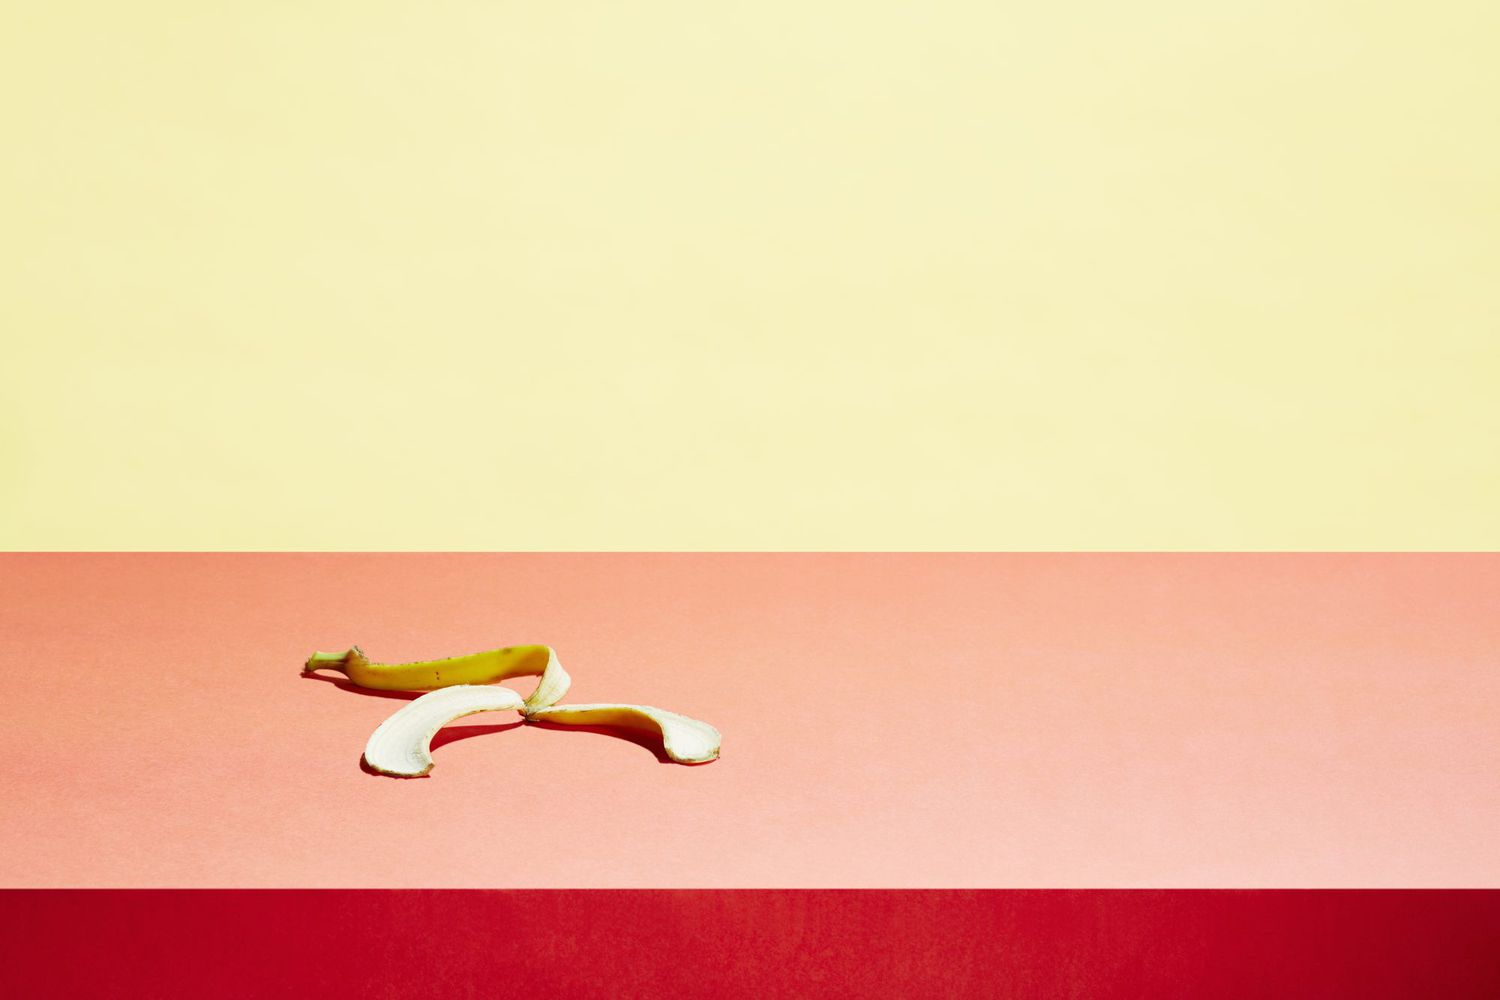 Banana skin in a table top to represent low libido from weight gain